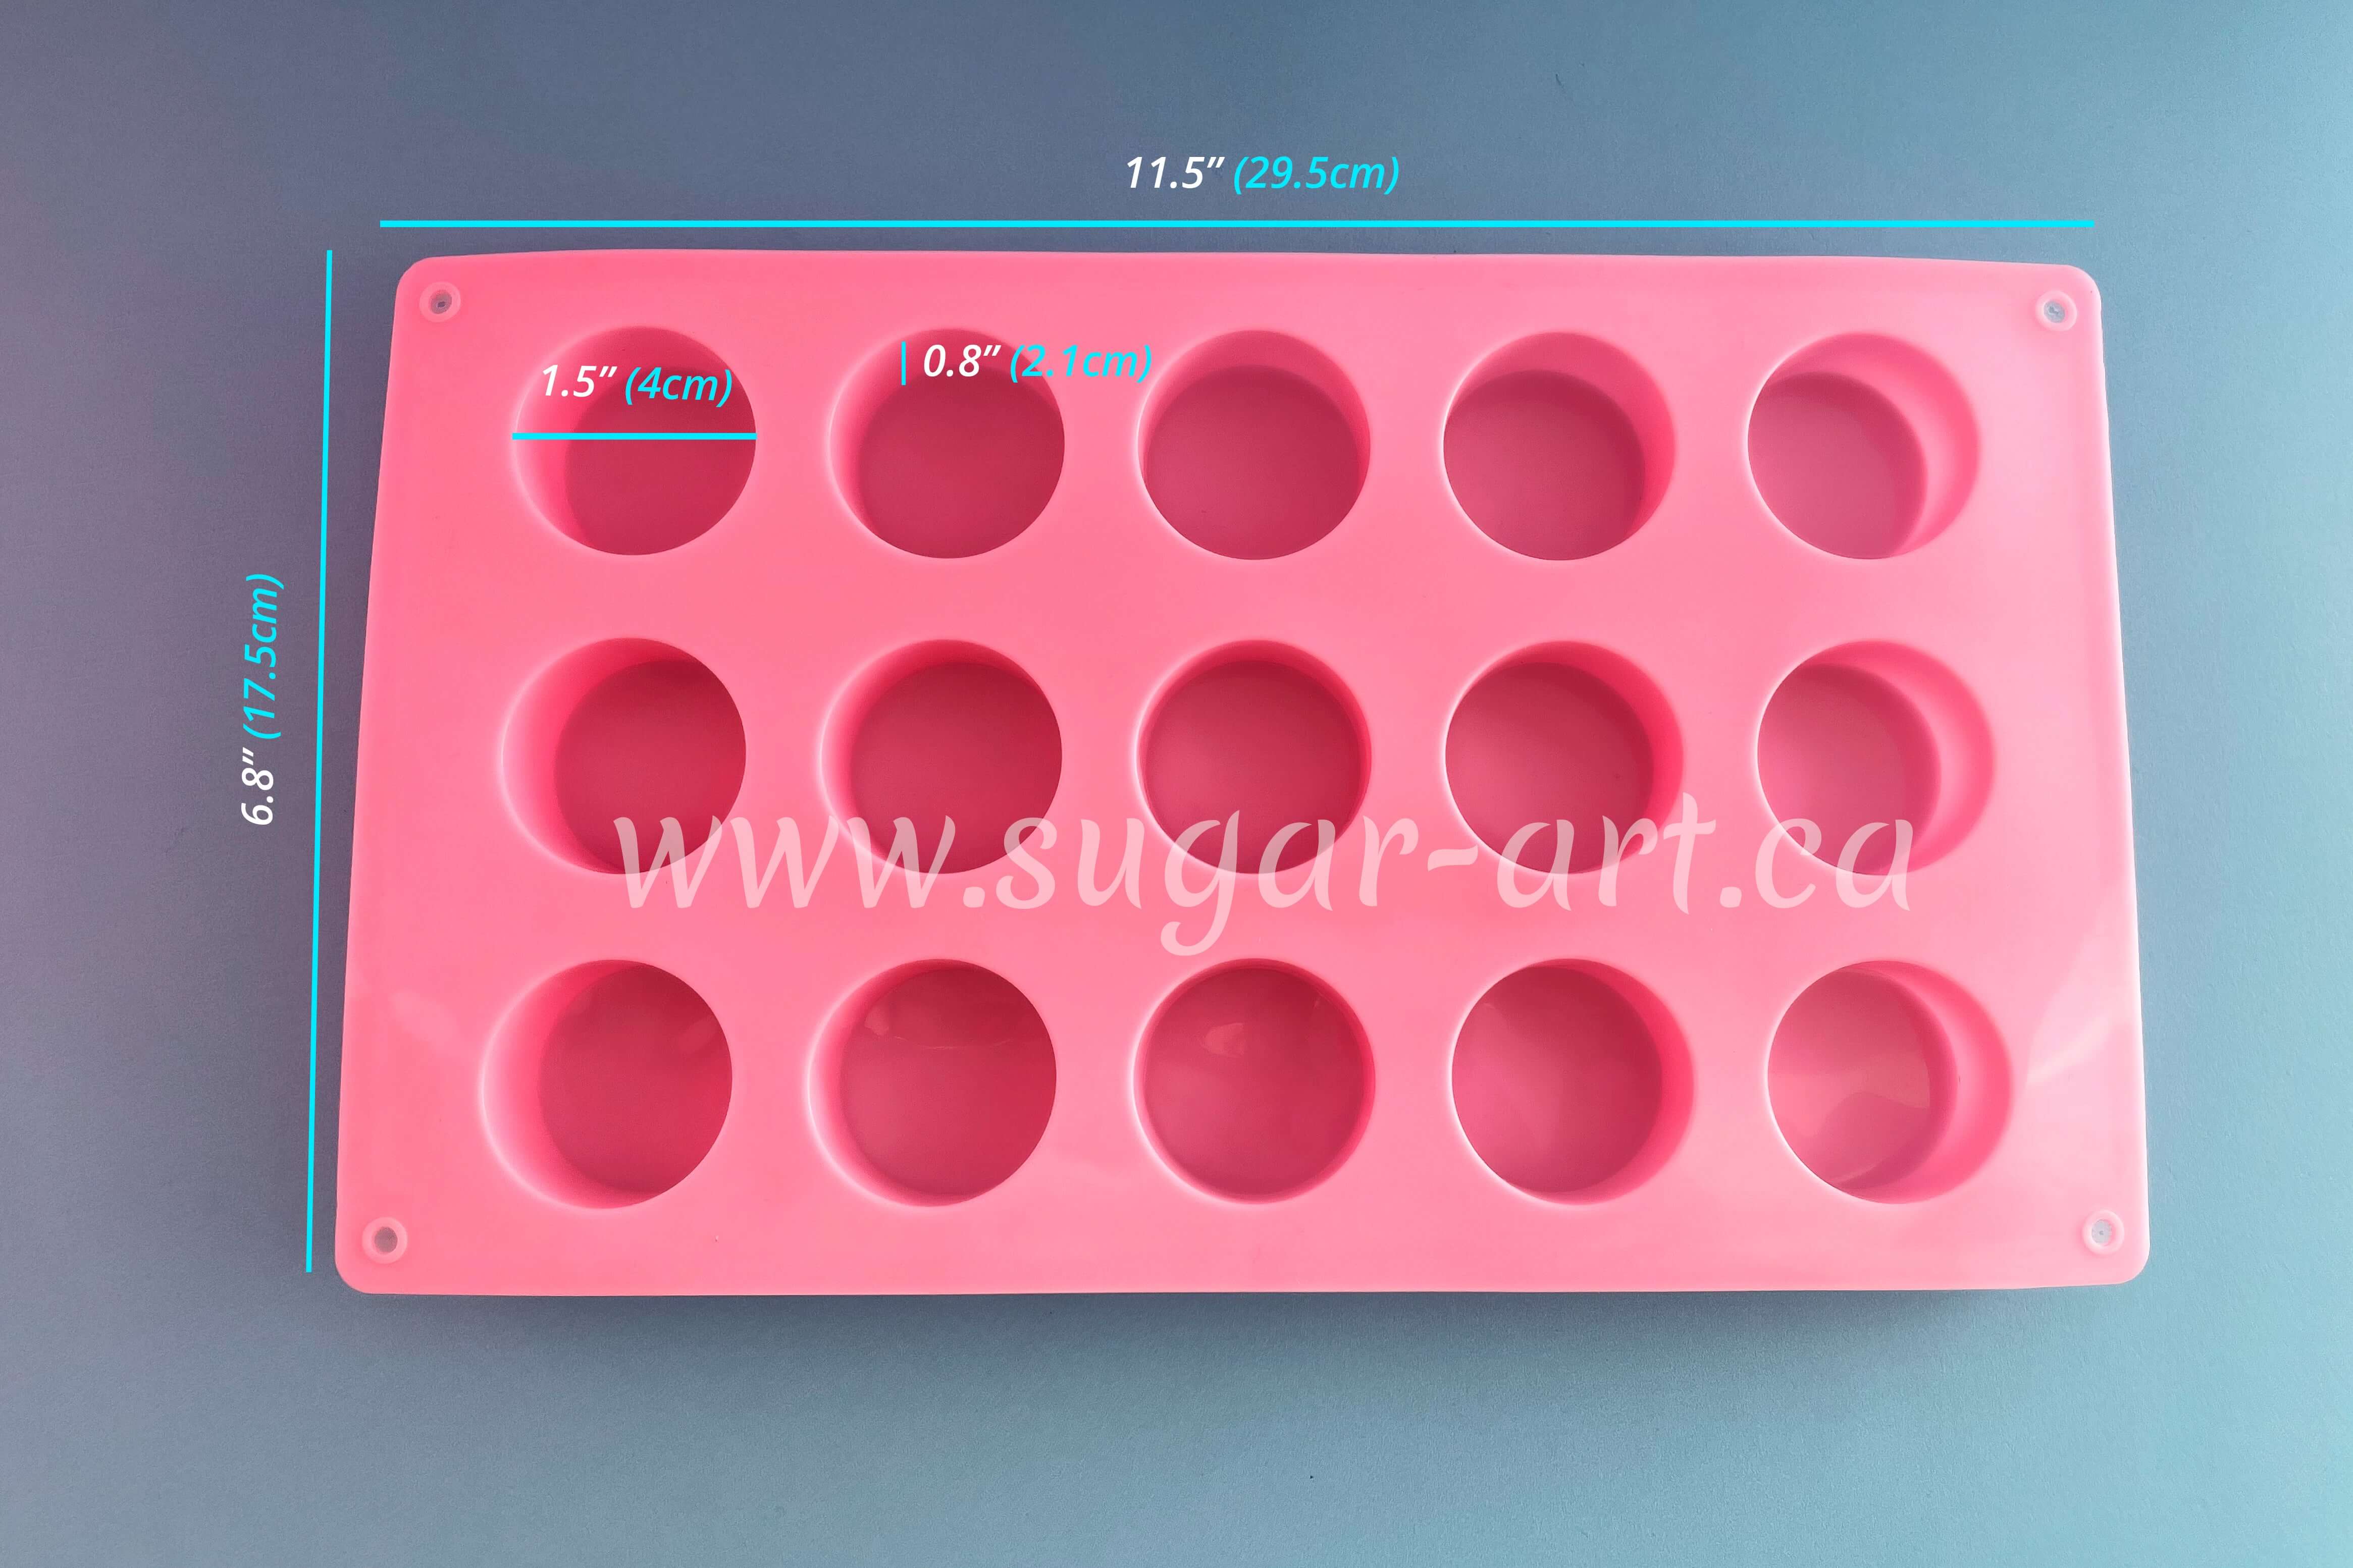 Small Round Cavity Silicone Mold for Lollipops - 12 Cavity 1.1 (2.8cm